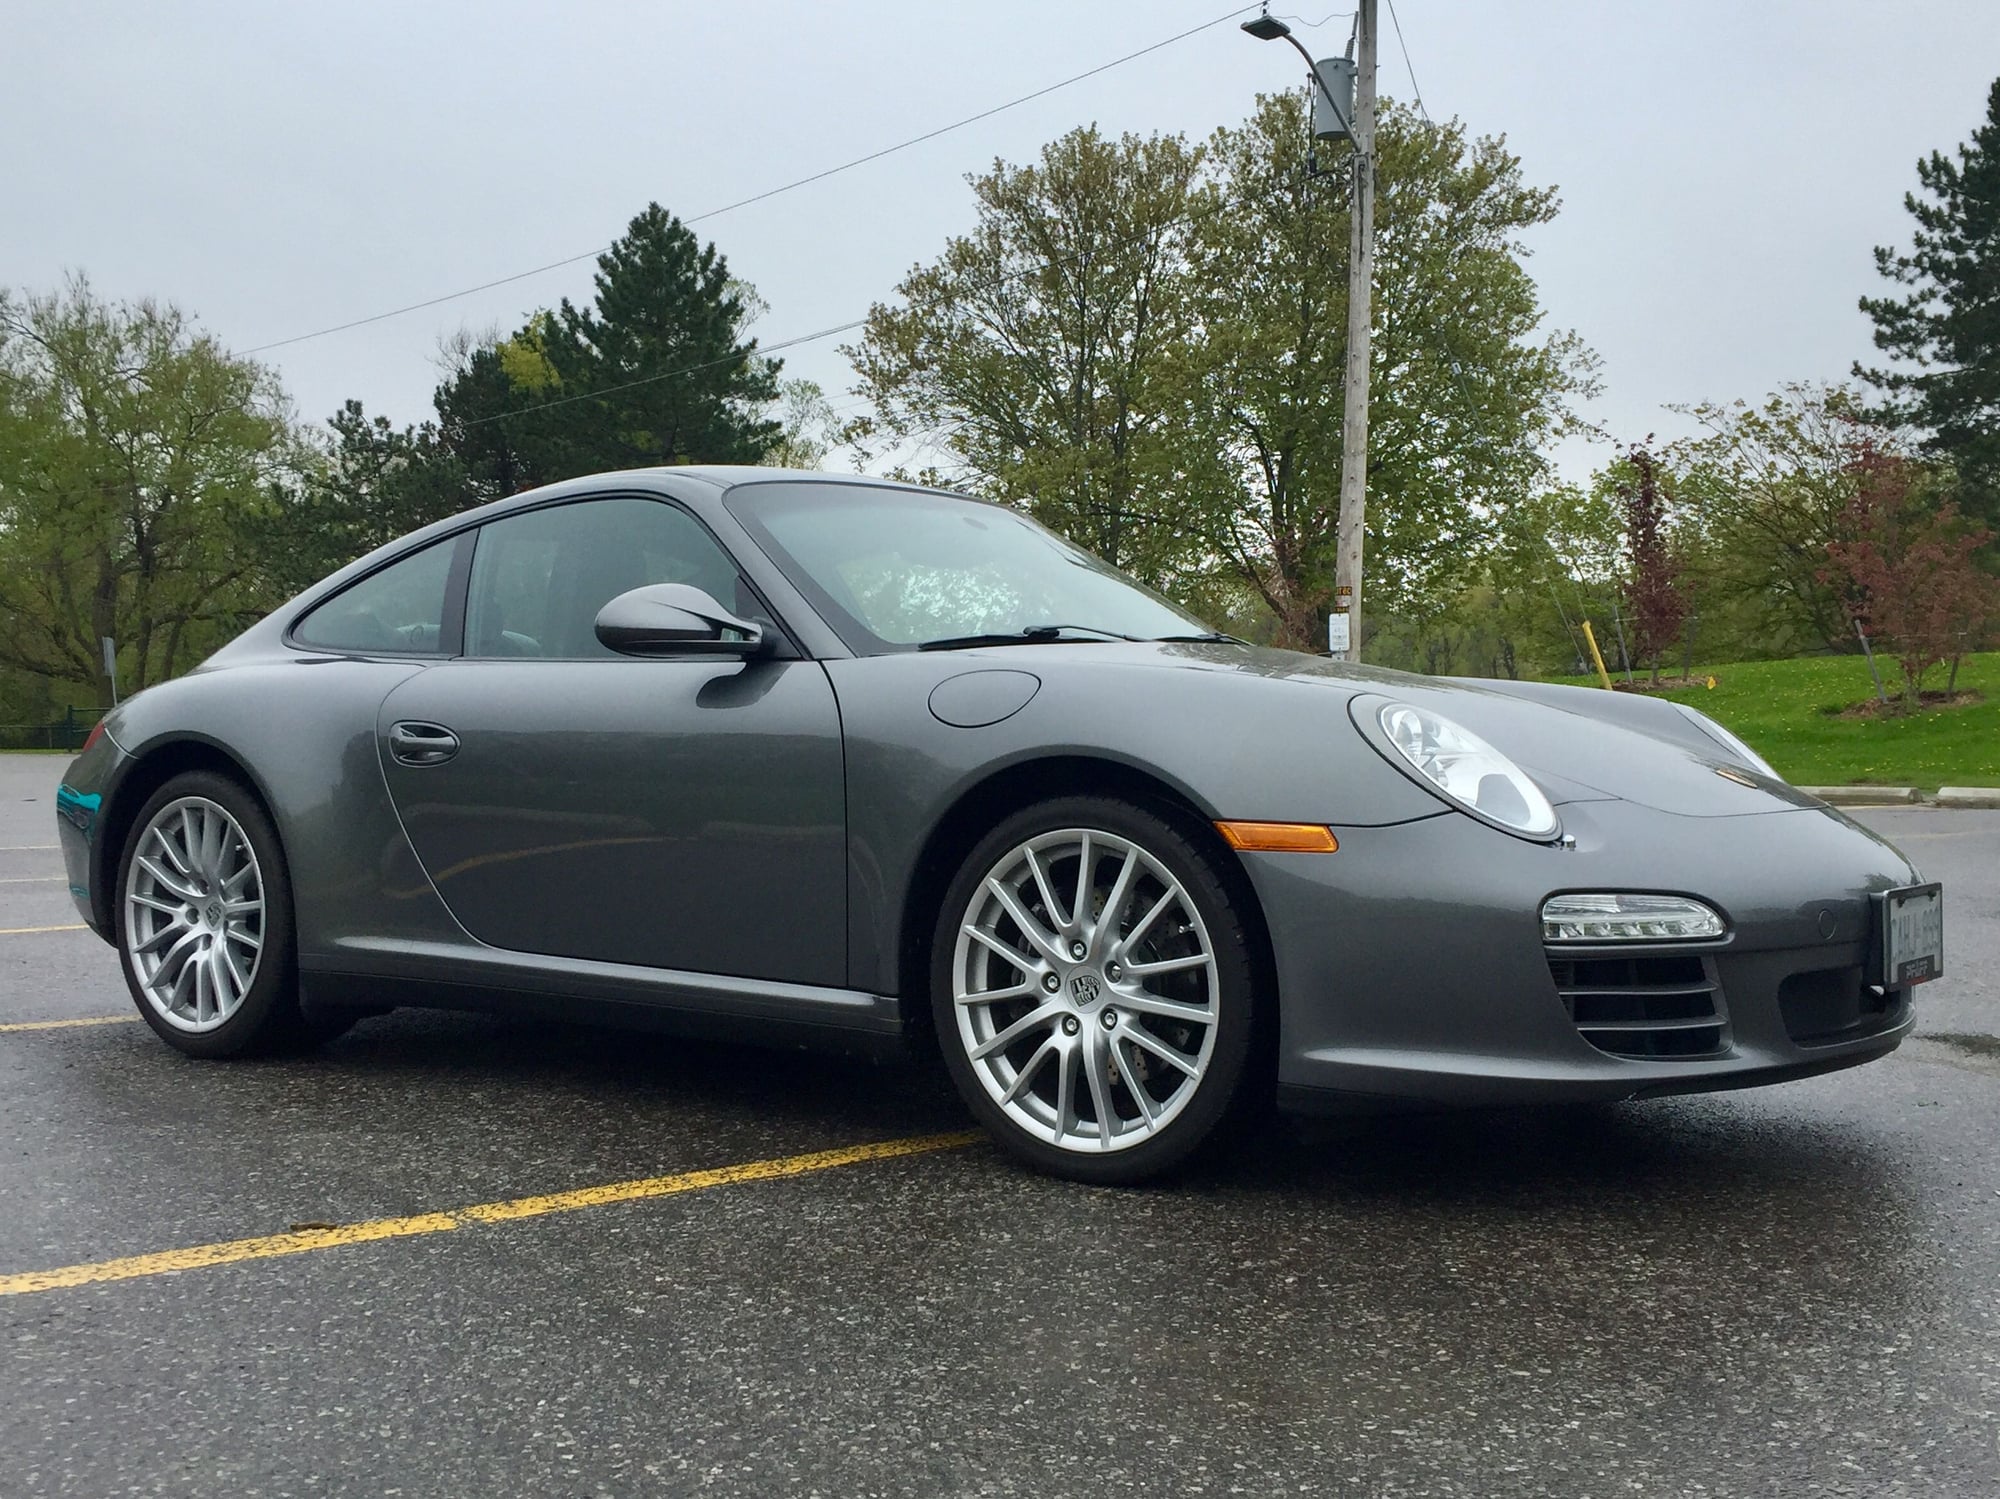 2009 Porsche 911 - 2009 Porsche 911 Carrera 4 - Meteor Grey on Black, PDK, Extremely well maintained - Used - VIN WP0AA29929S707407 - 67,108 Miles - 6 cyl - AWD - Automatic - Coupe - Gray - Toronto, ON M4C5L2, Canada